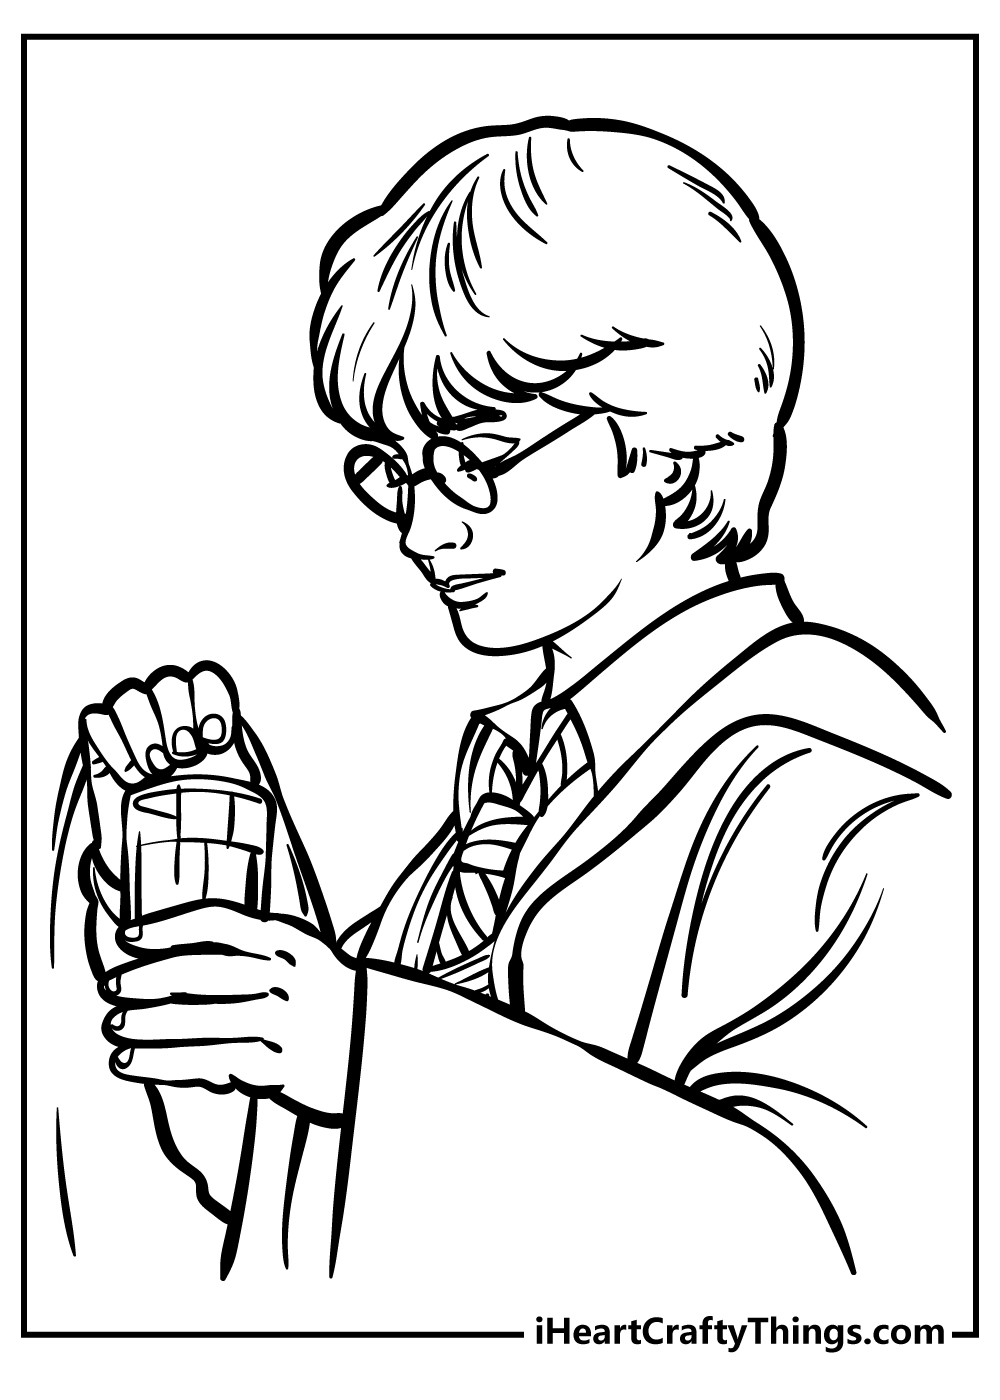 Harry Potter Coloring Book for kids free printable